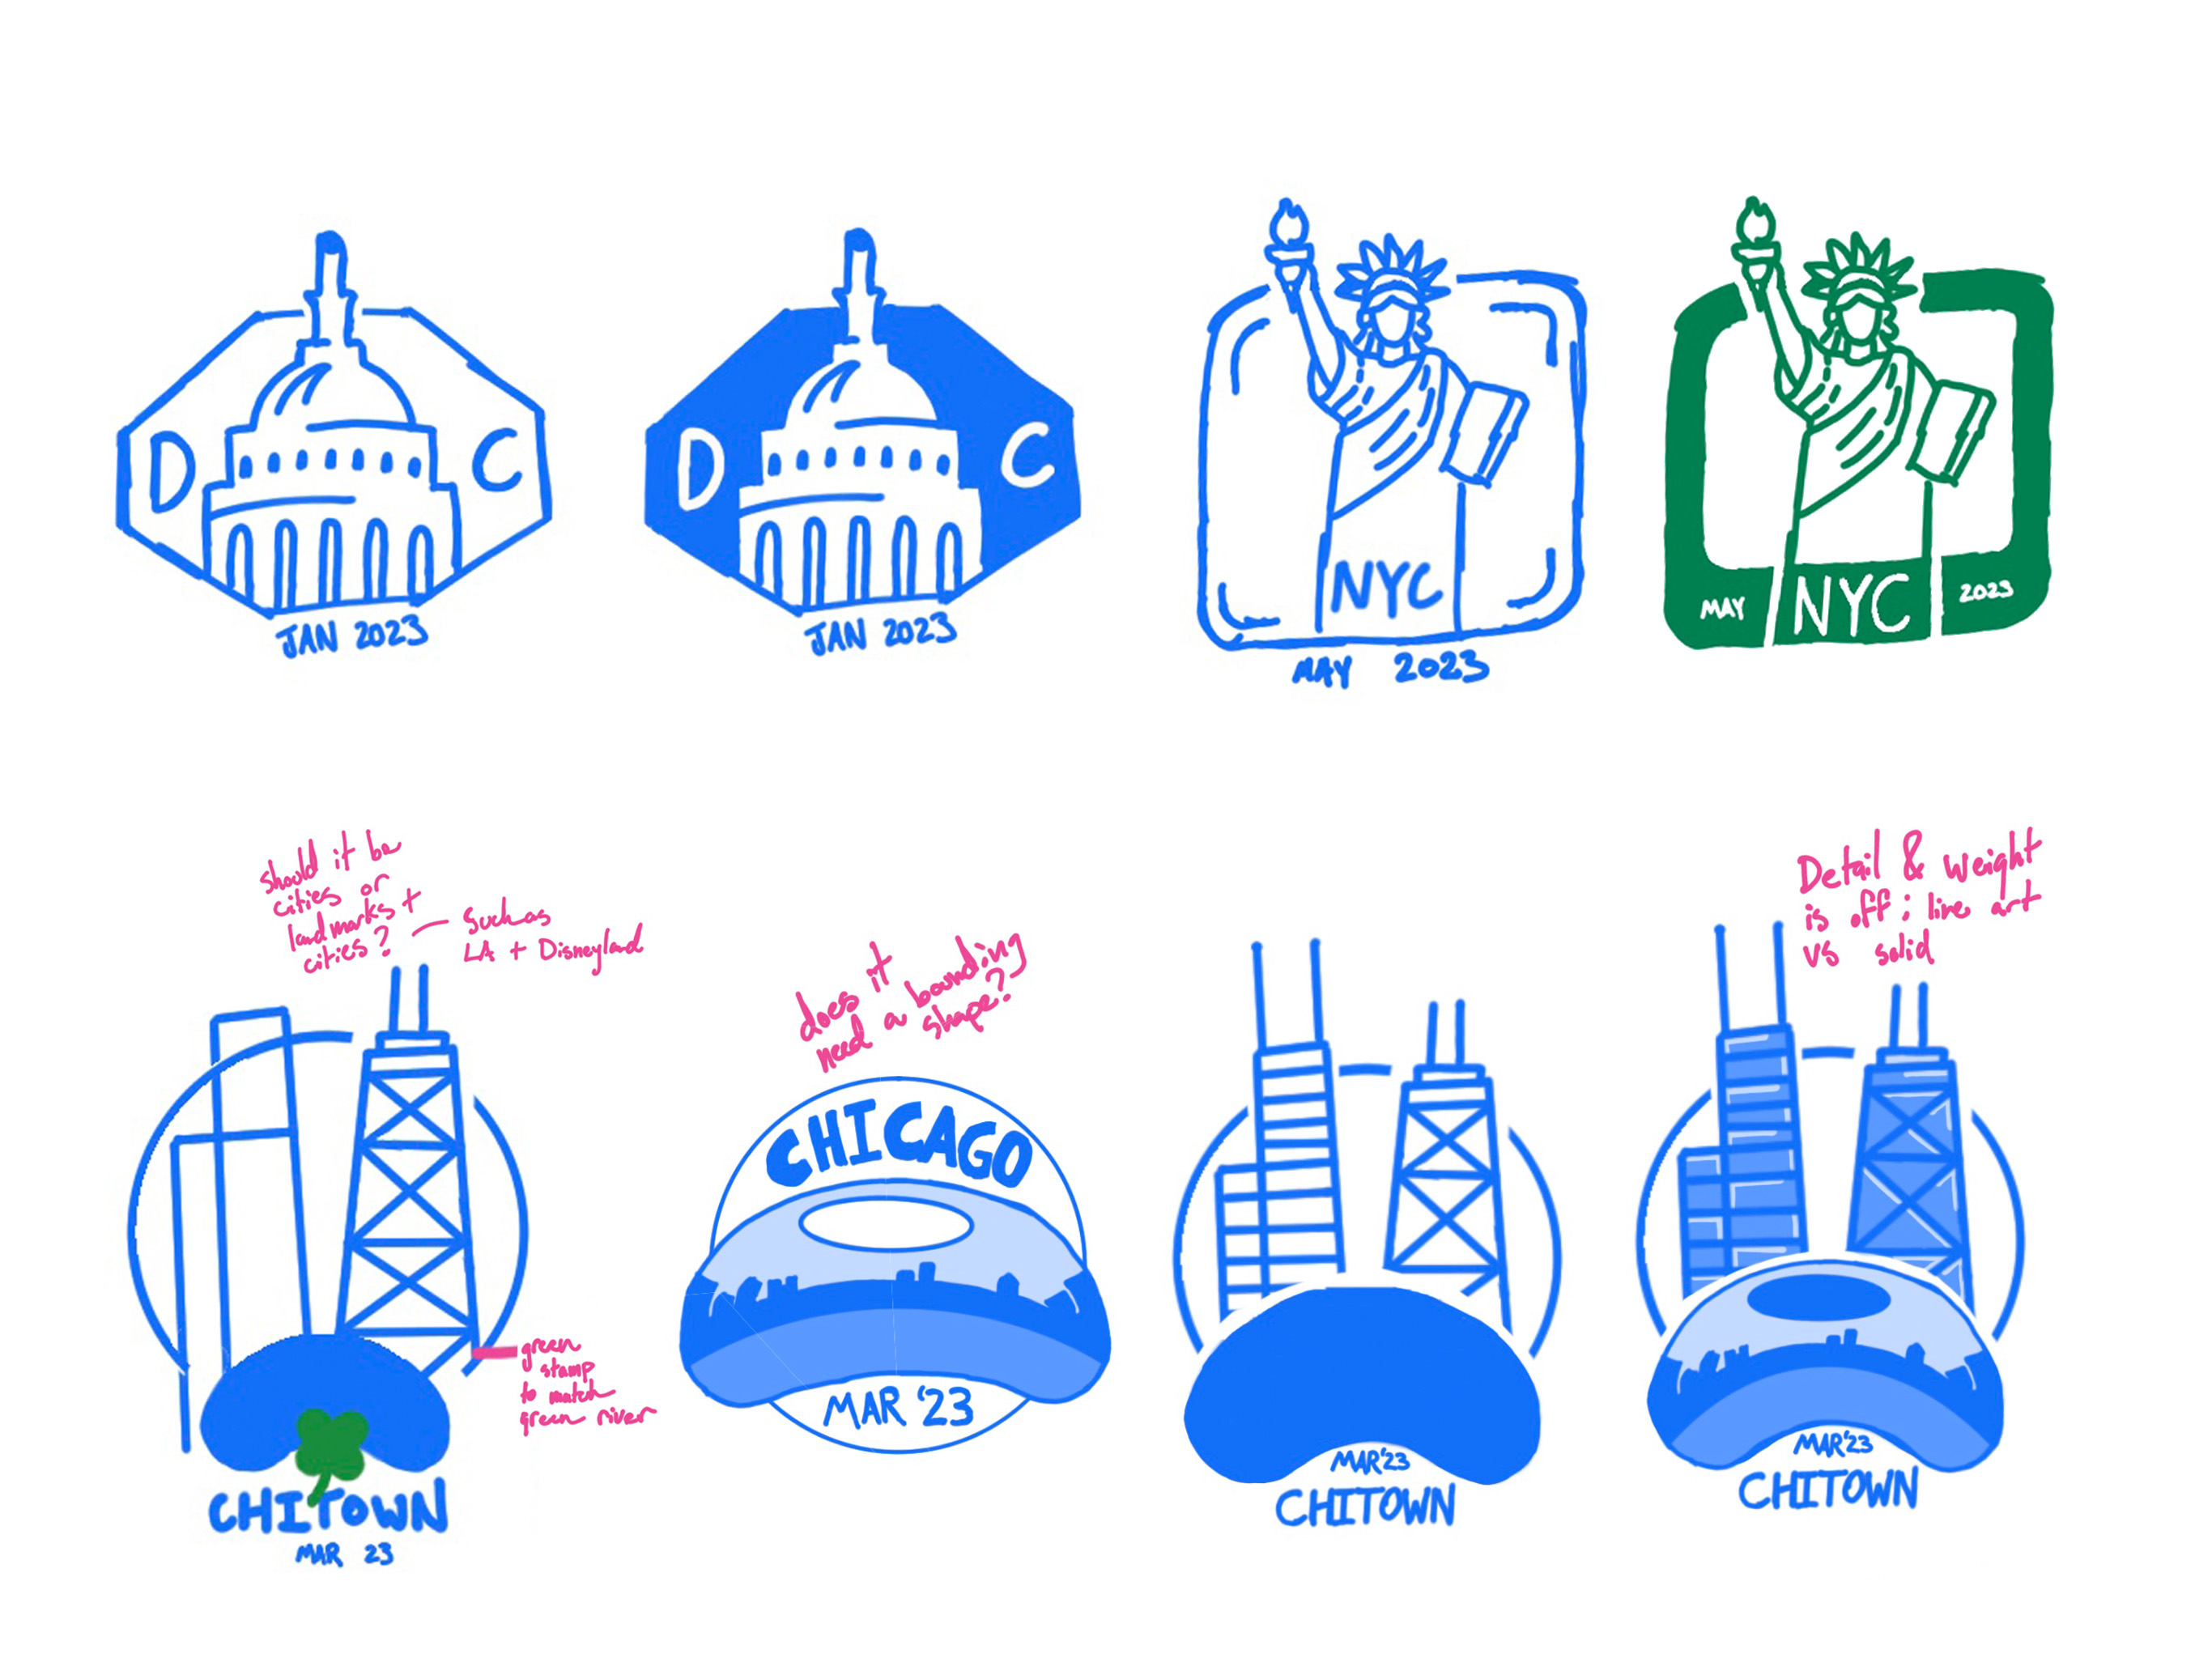 Sketches of the DC, NYC and Chicago stamps